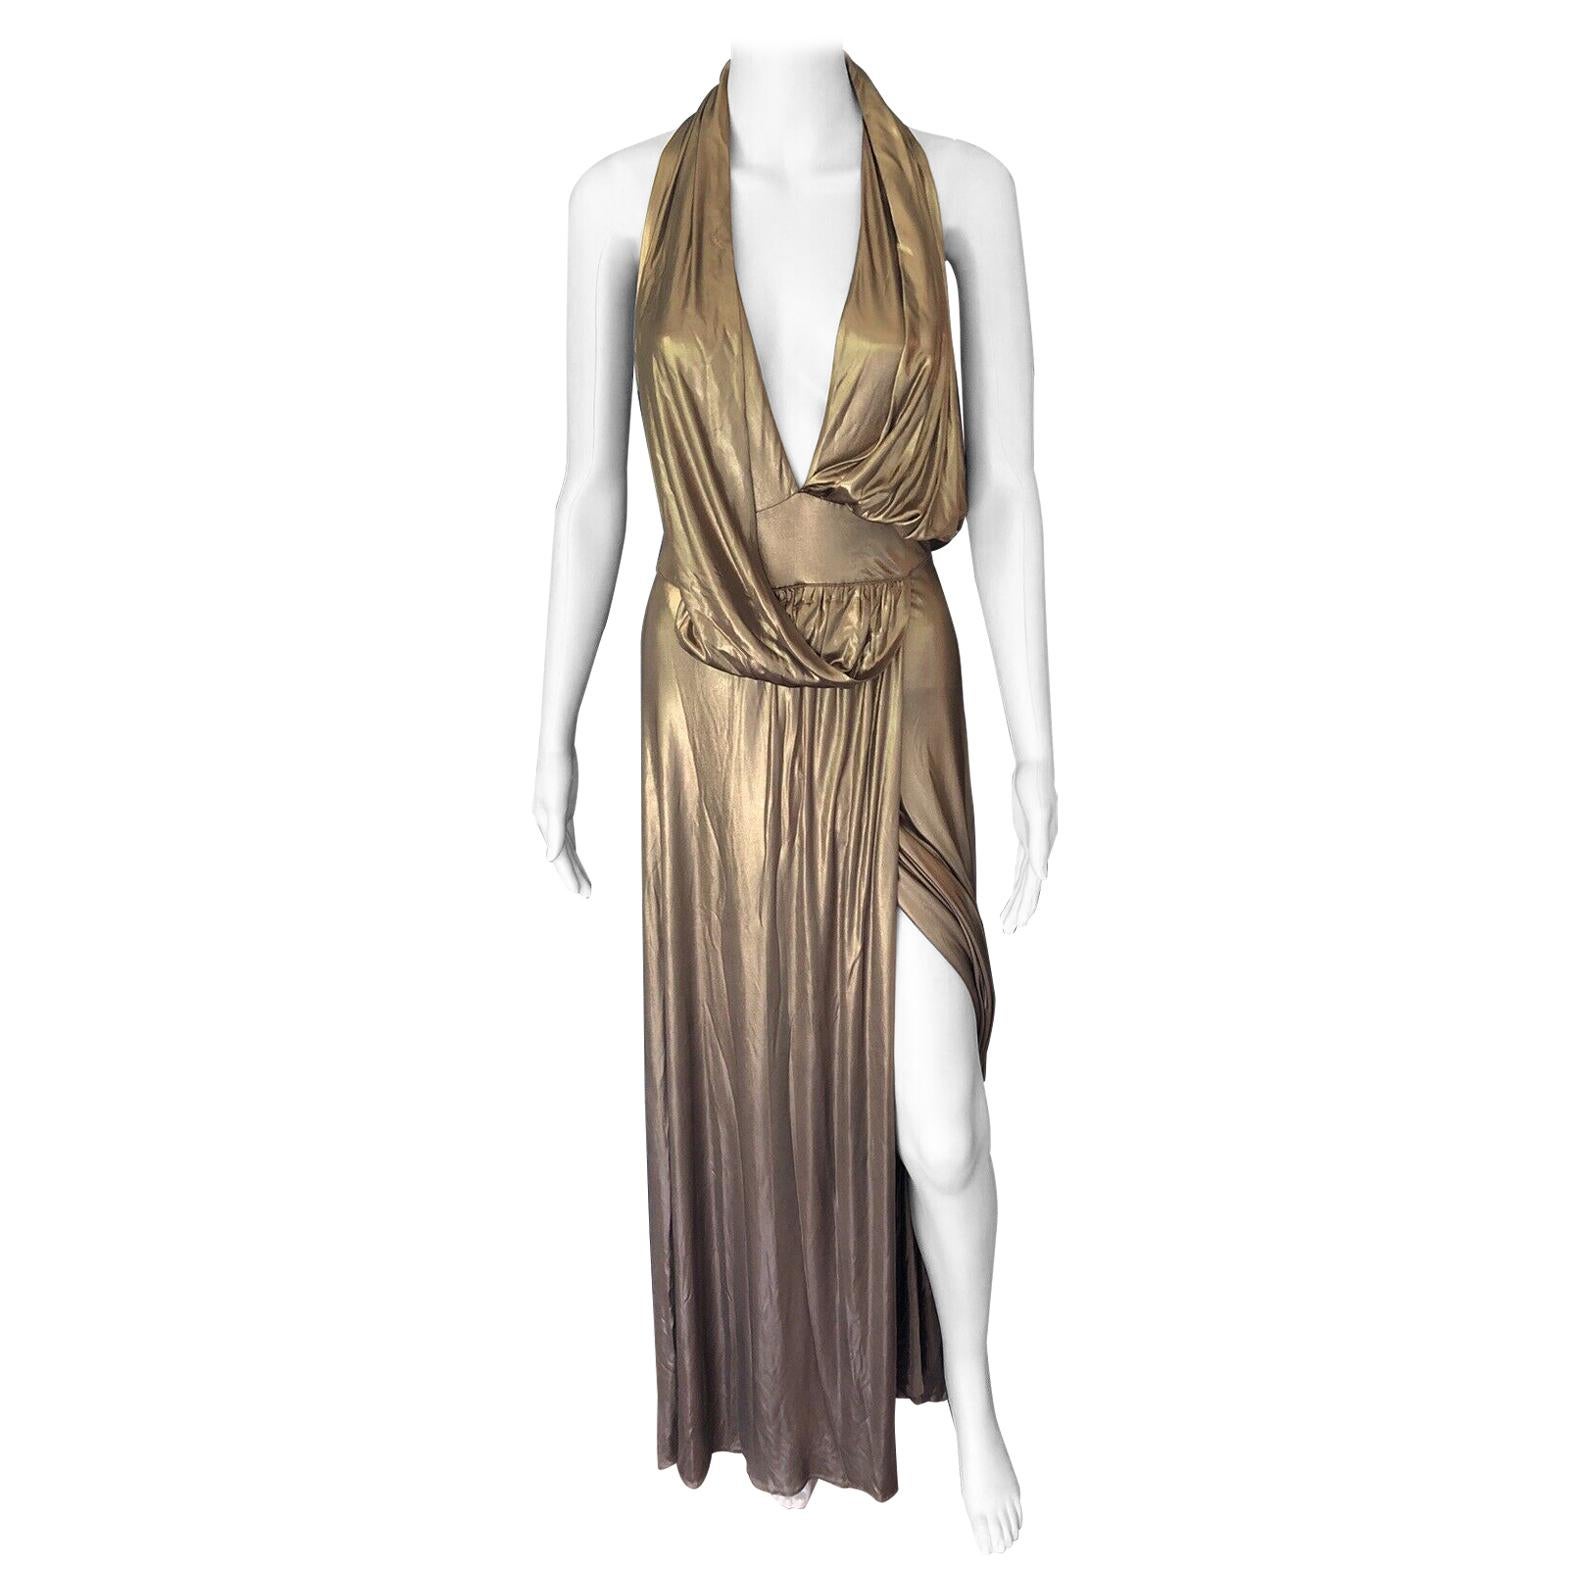 Gucci Runway F/W 2006 Plunging Neckline Backless Gold Metallic Dress Gown